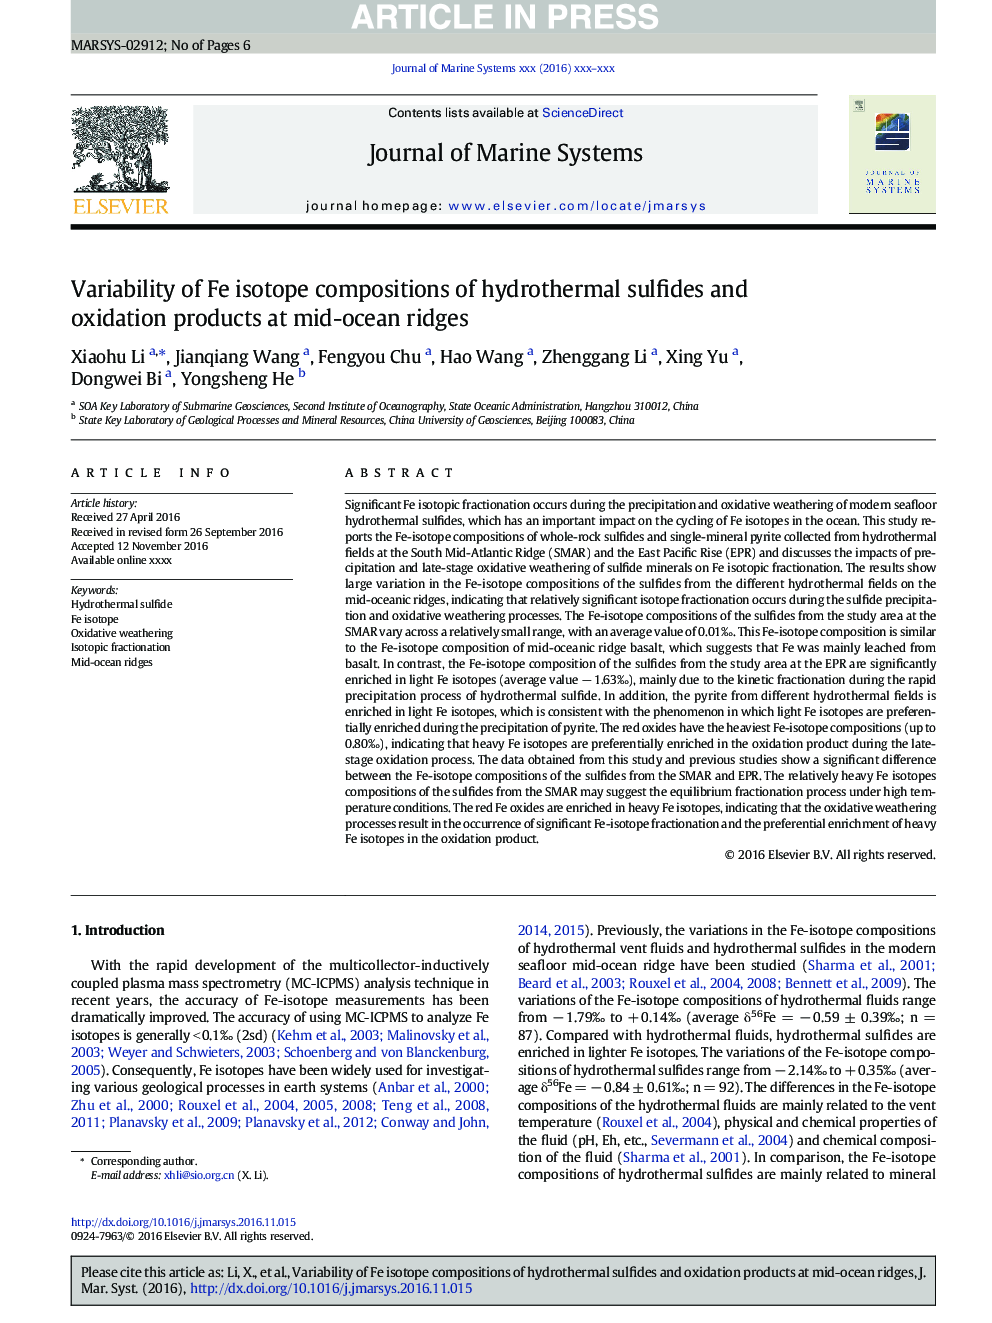 Variability of Fe isotope compositions of hydrothermal sulfides and oxidation products at mid-ocean ridges